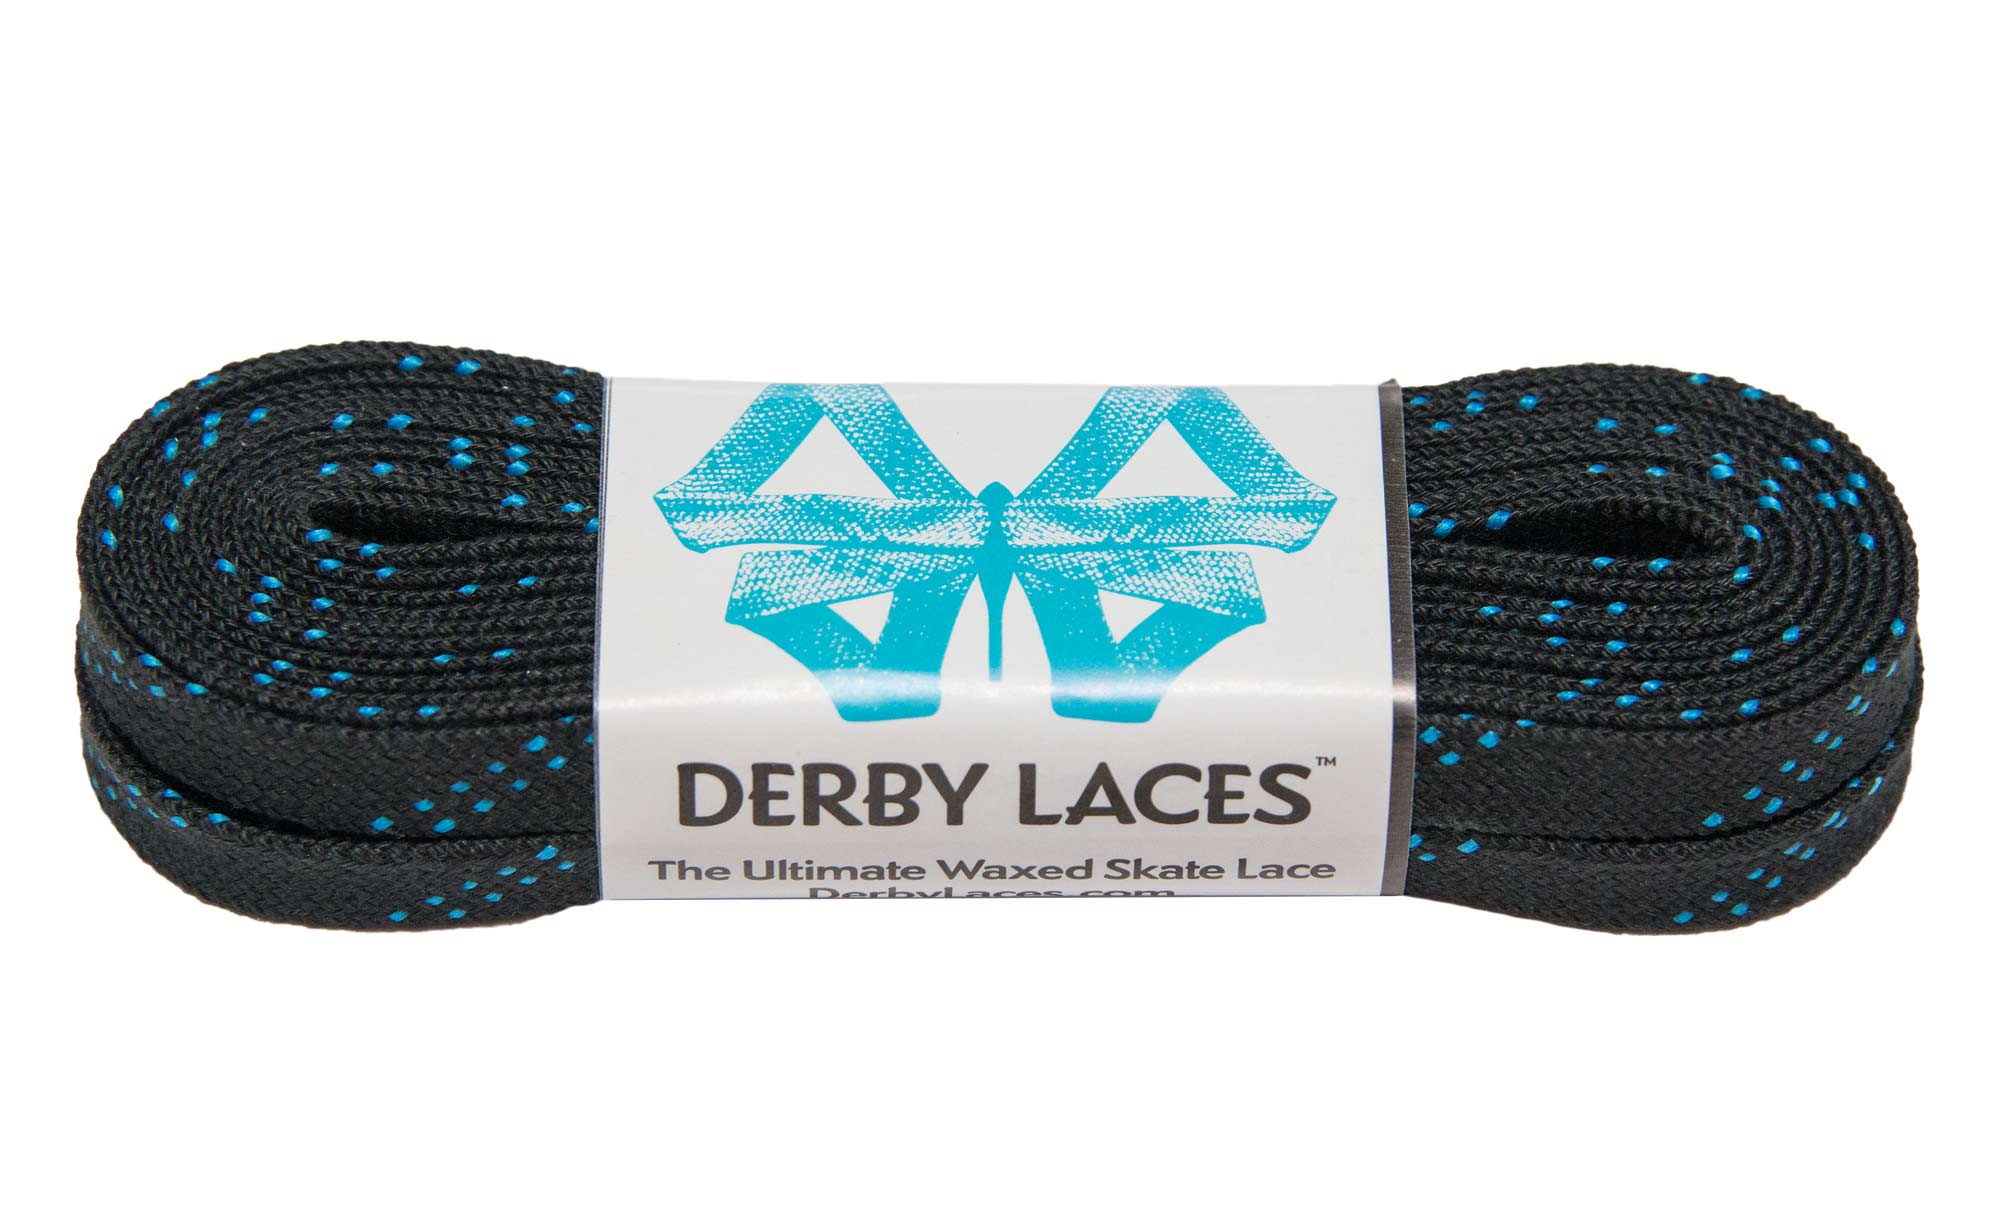 Boots Hockey Skates and Regular Shoes Derby Laces Style Wide 10mm Waxed Lace for Roller Skates 